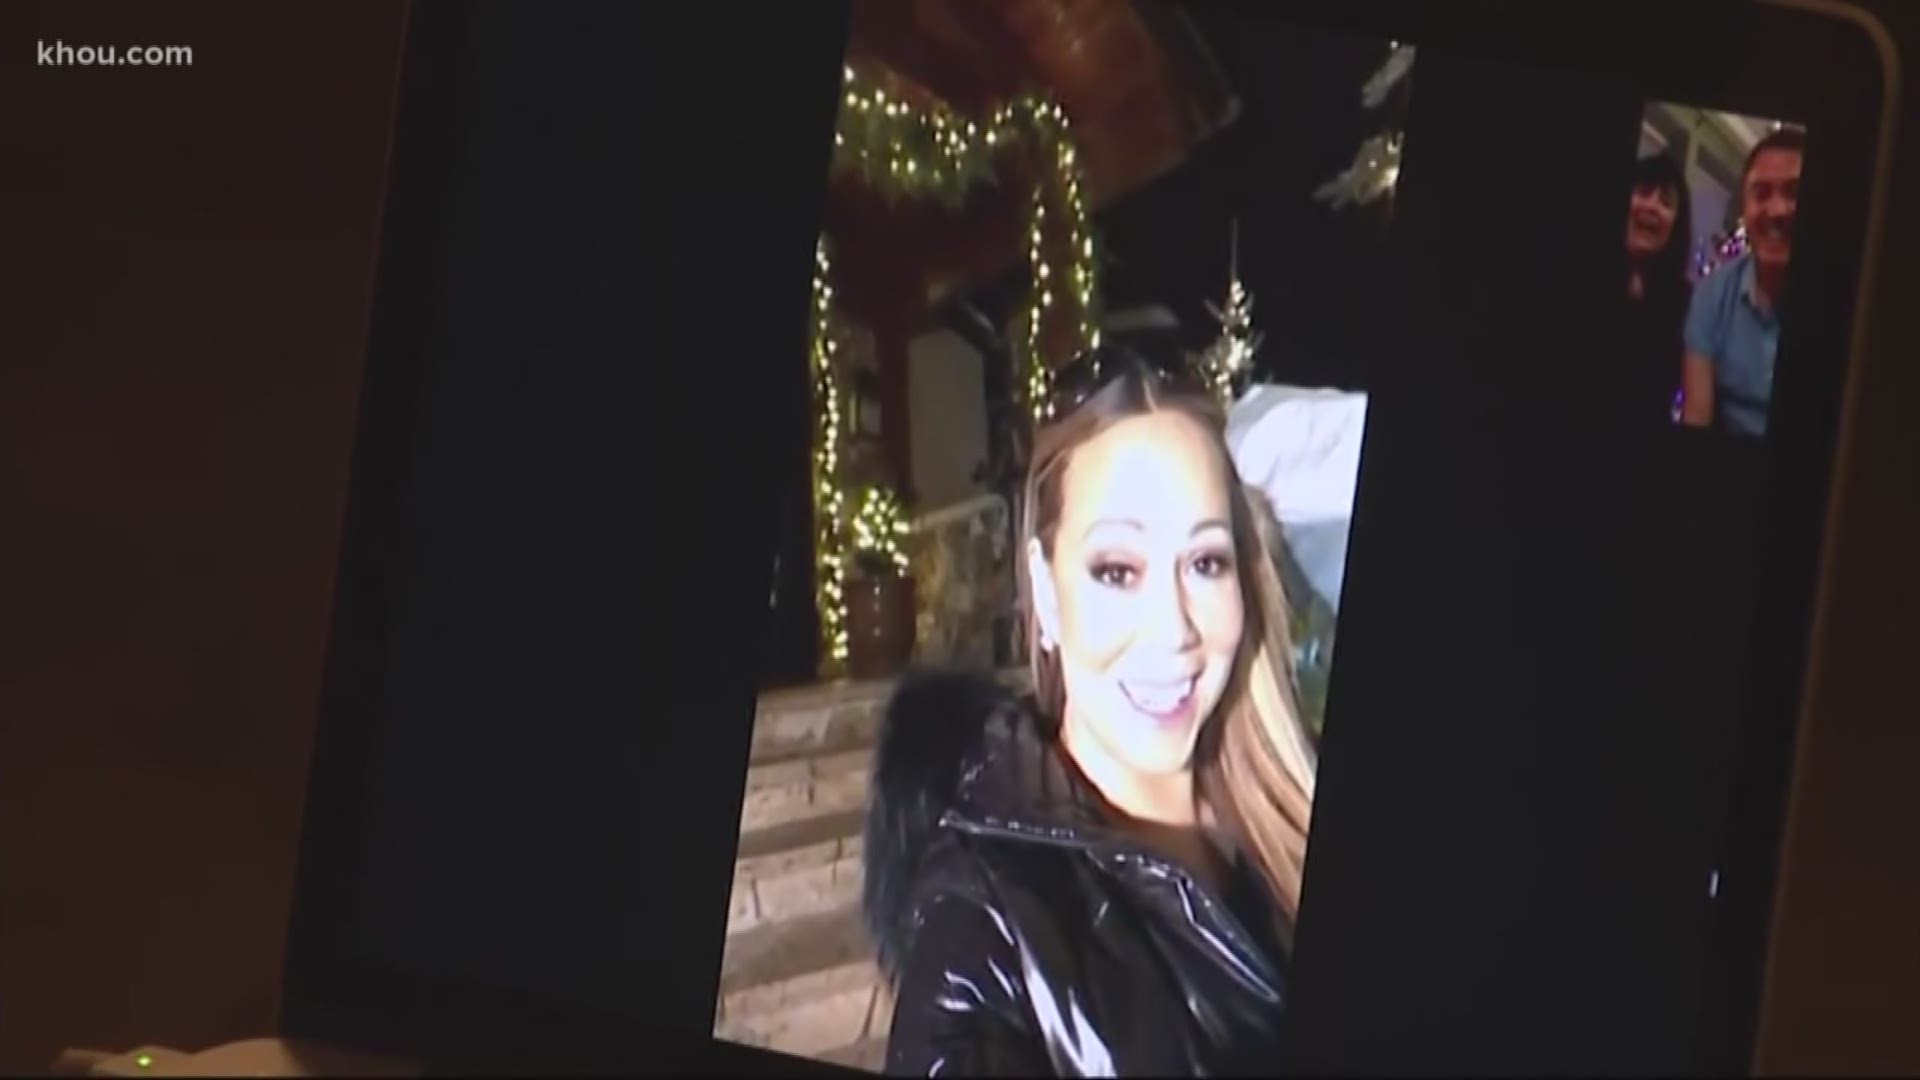 A home in Sacramento used a projection screen to blast Mariah Carey Christmas videos as part of their decorations. The singer got word of the home via Twitter and called the family to wish them a Merry Christmas.